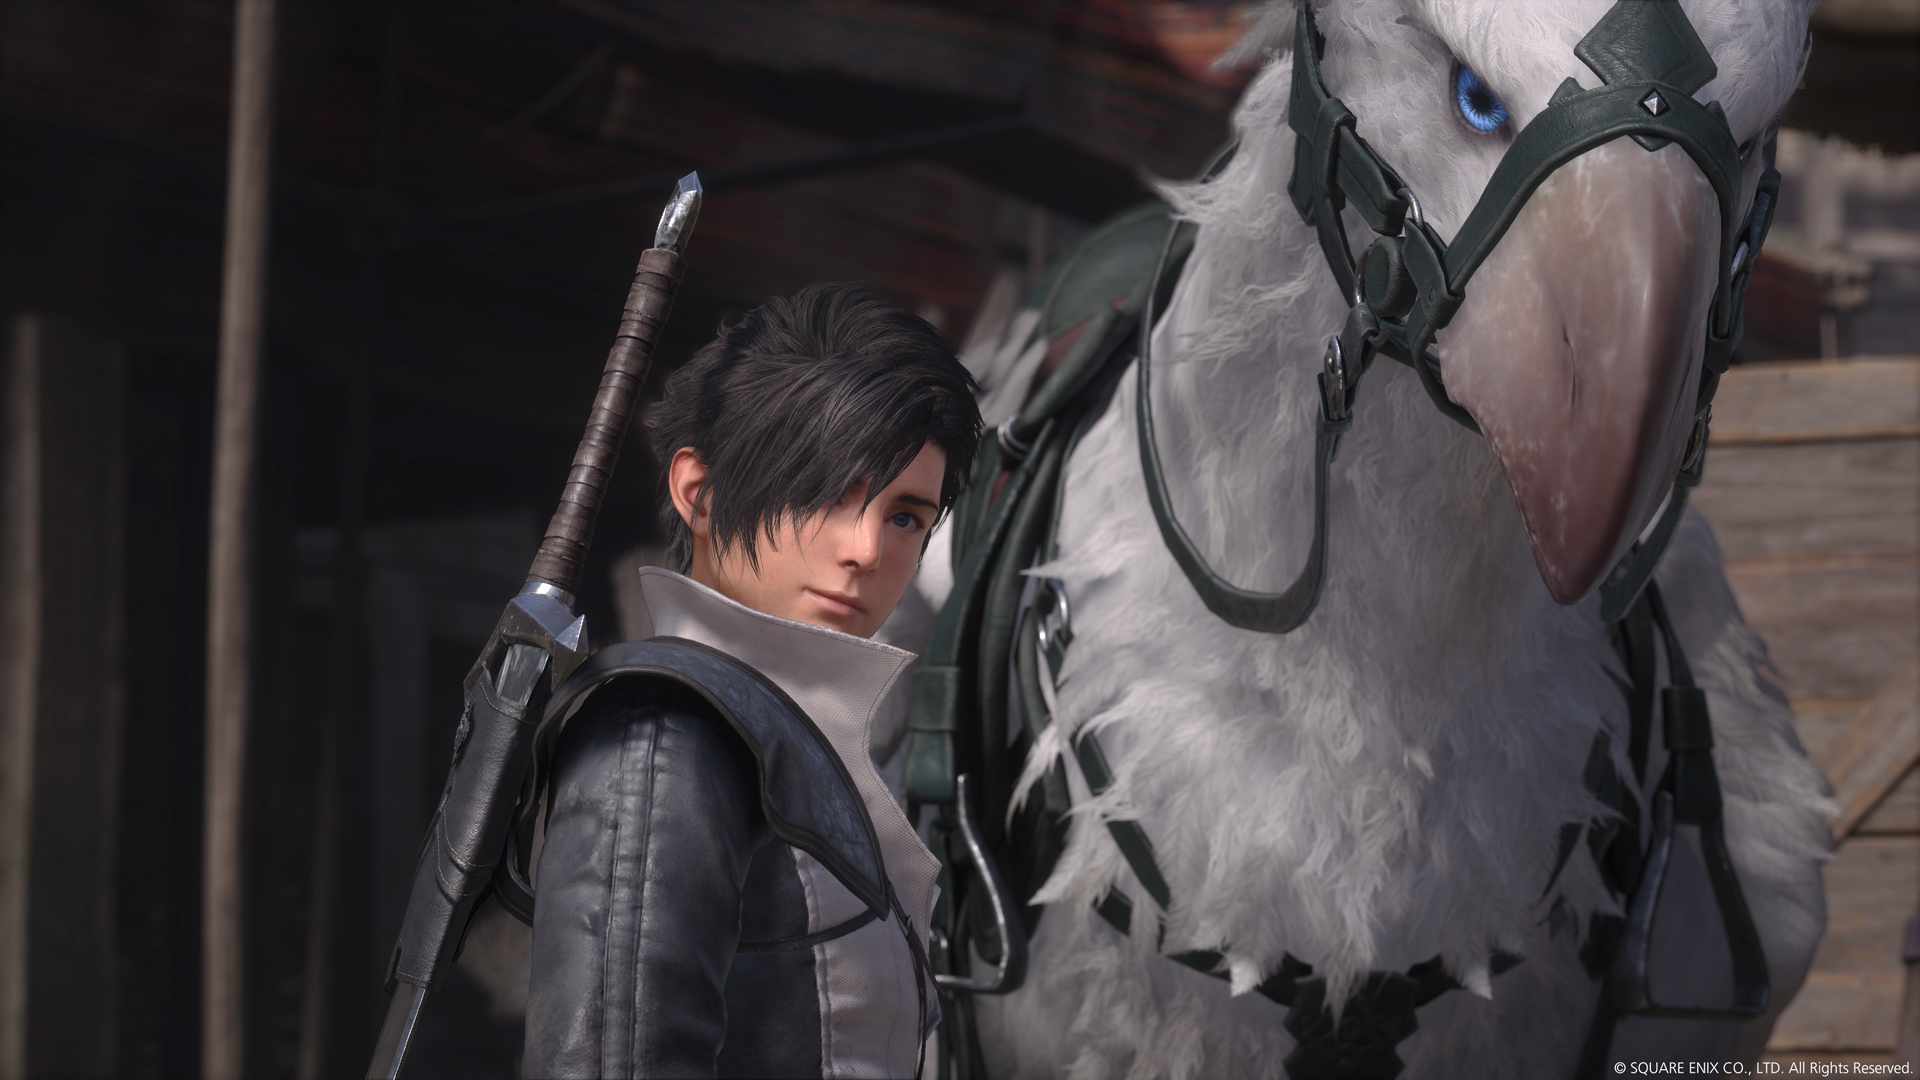 Final Fantasy 16 release date, special editions detailed